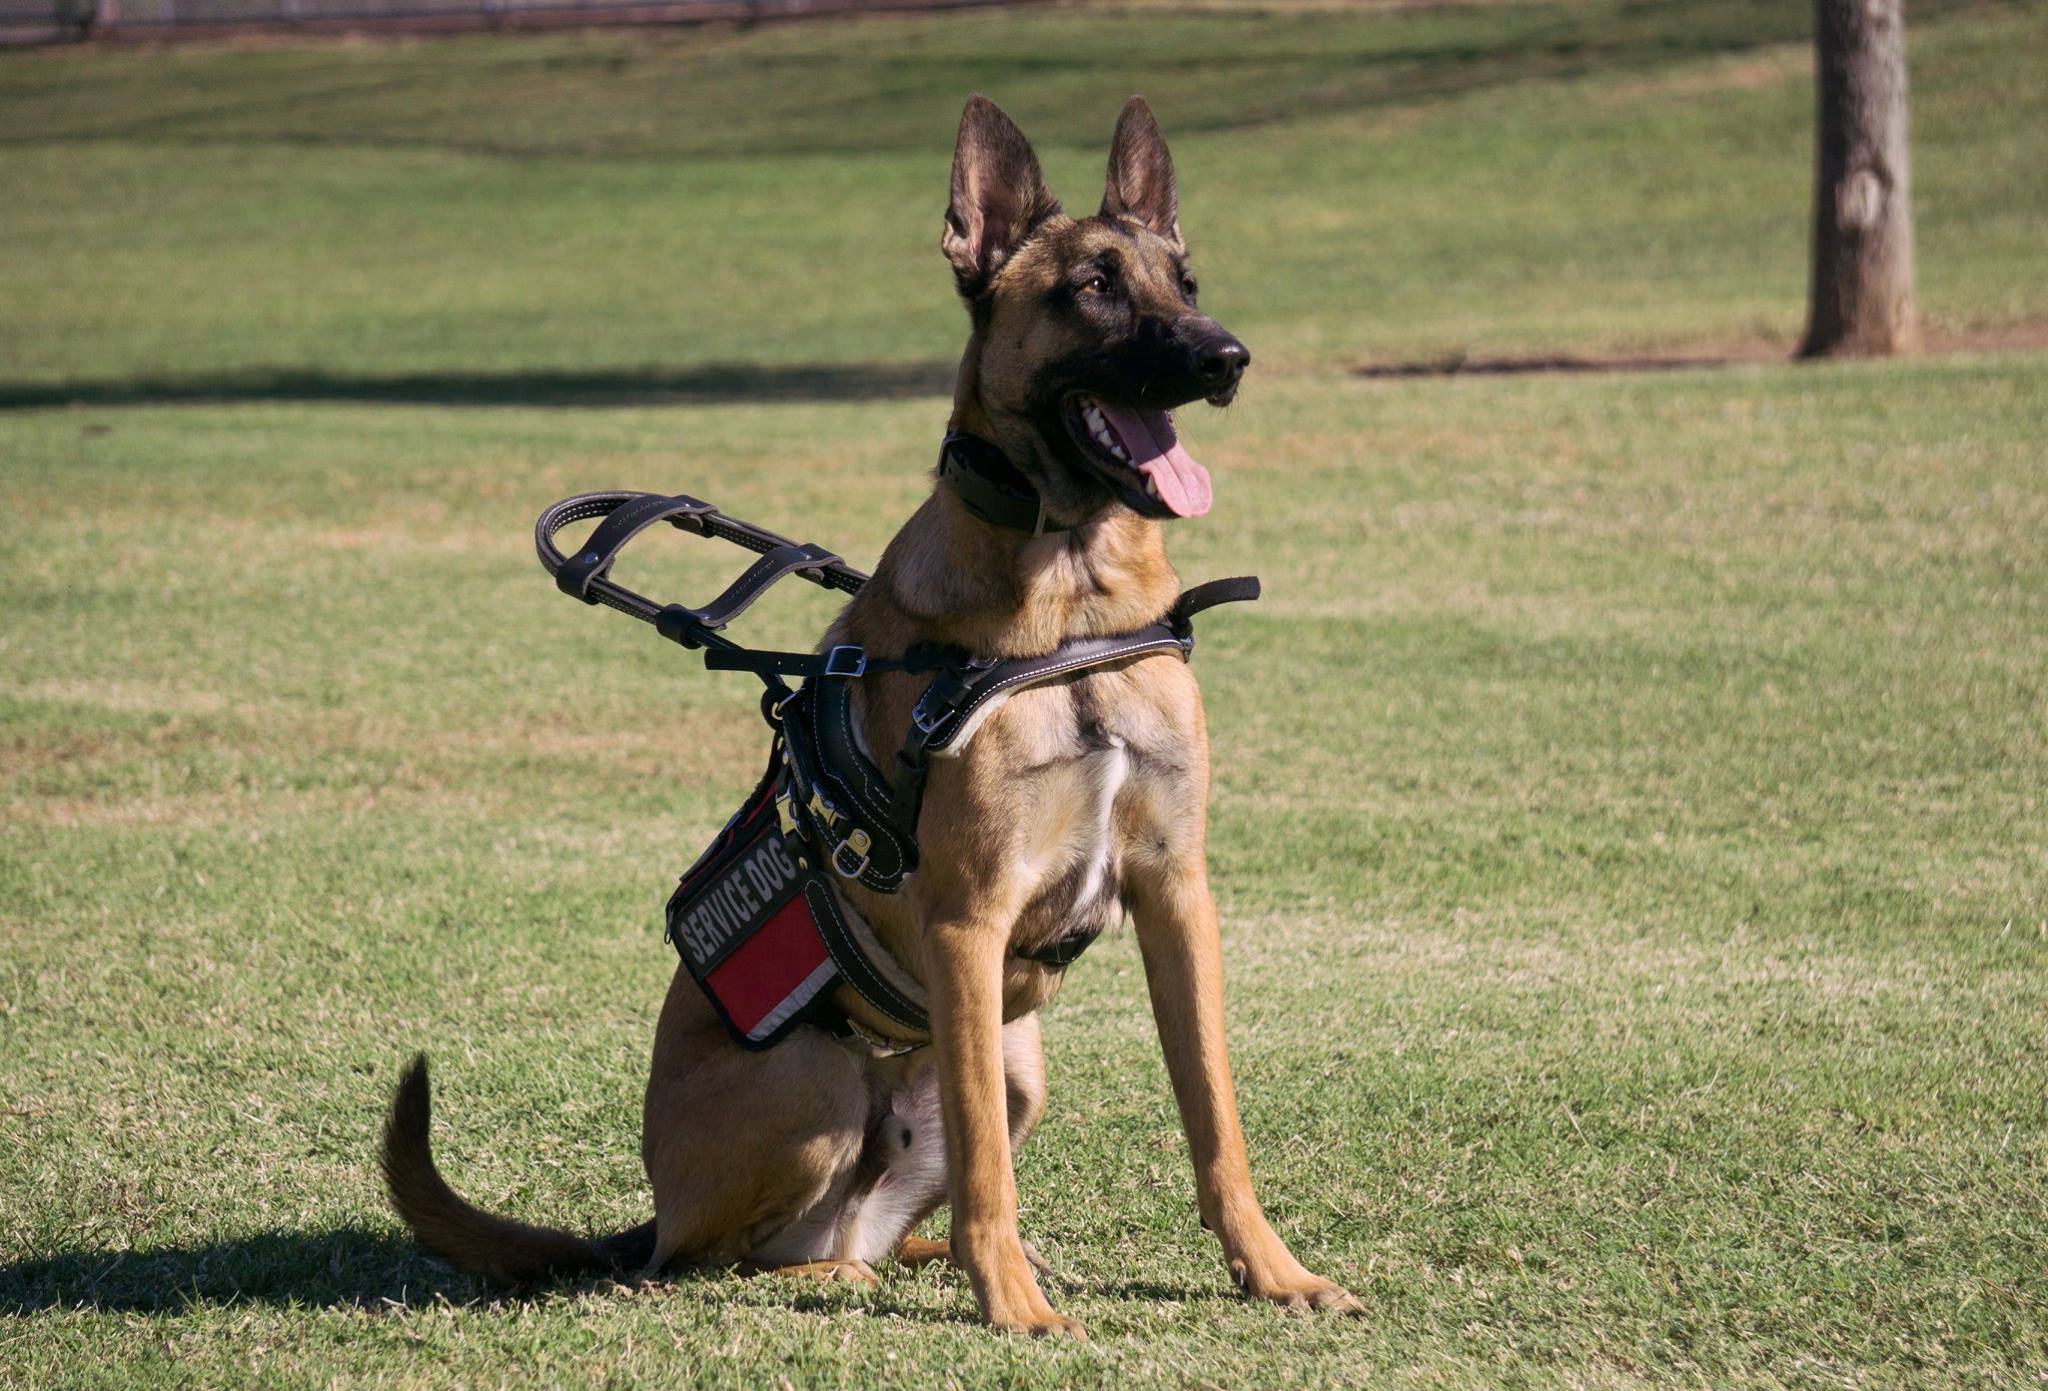 Spending Your Summer with a Service Dog in Phoenix